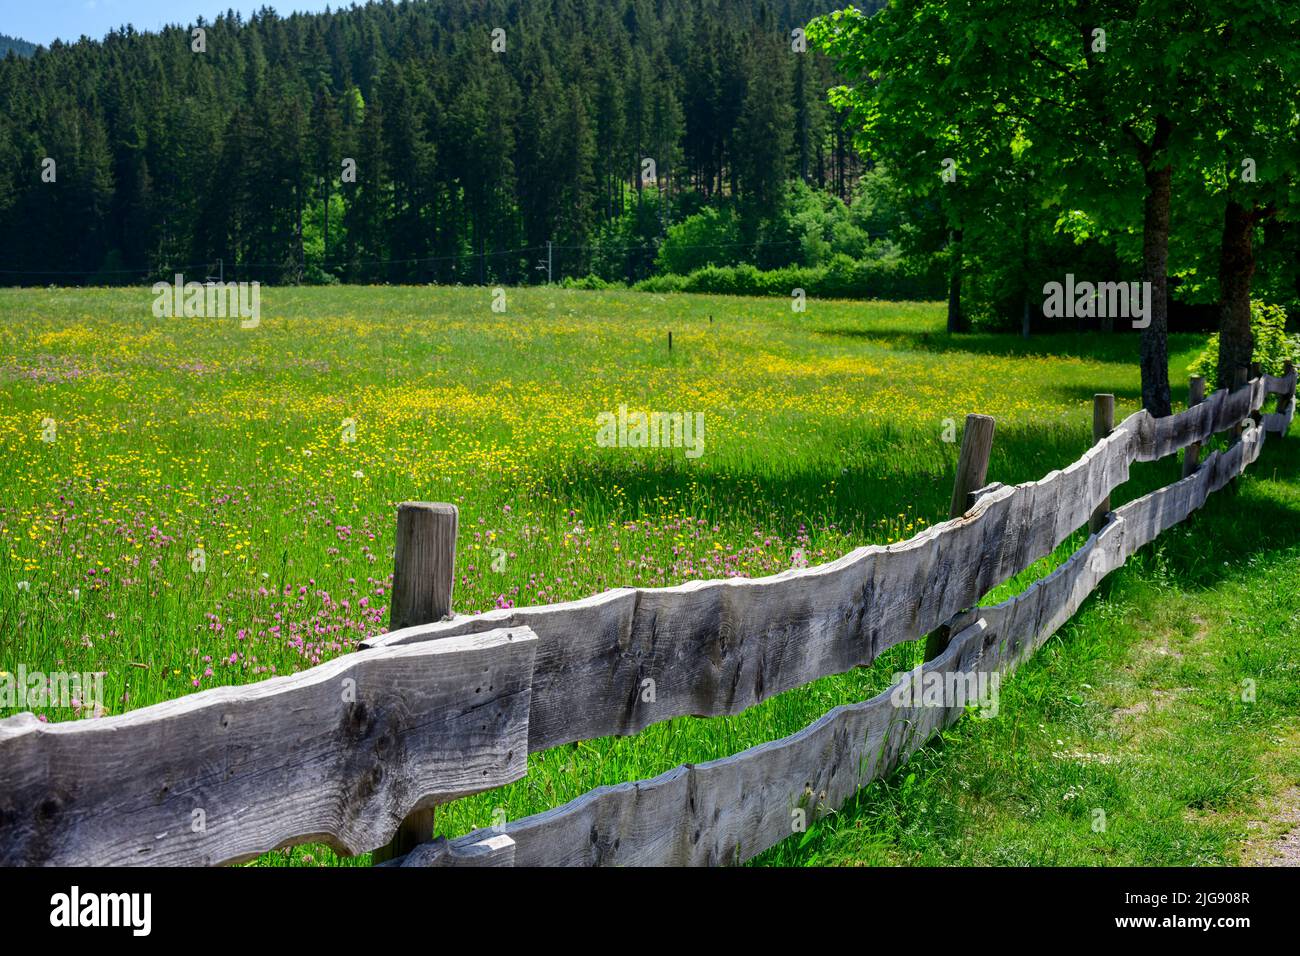 Germany, Baden-Württemberg, Black Forest, Titisee, old wooden picket fence at a meadow. Stock Photo